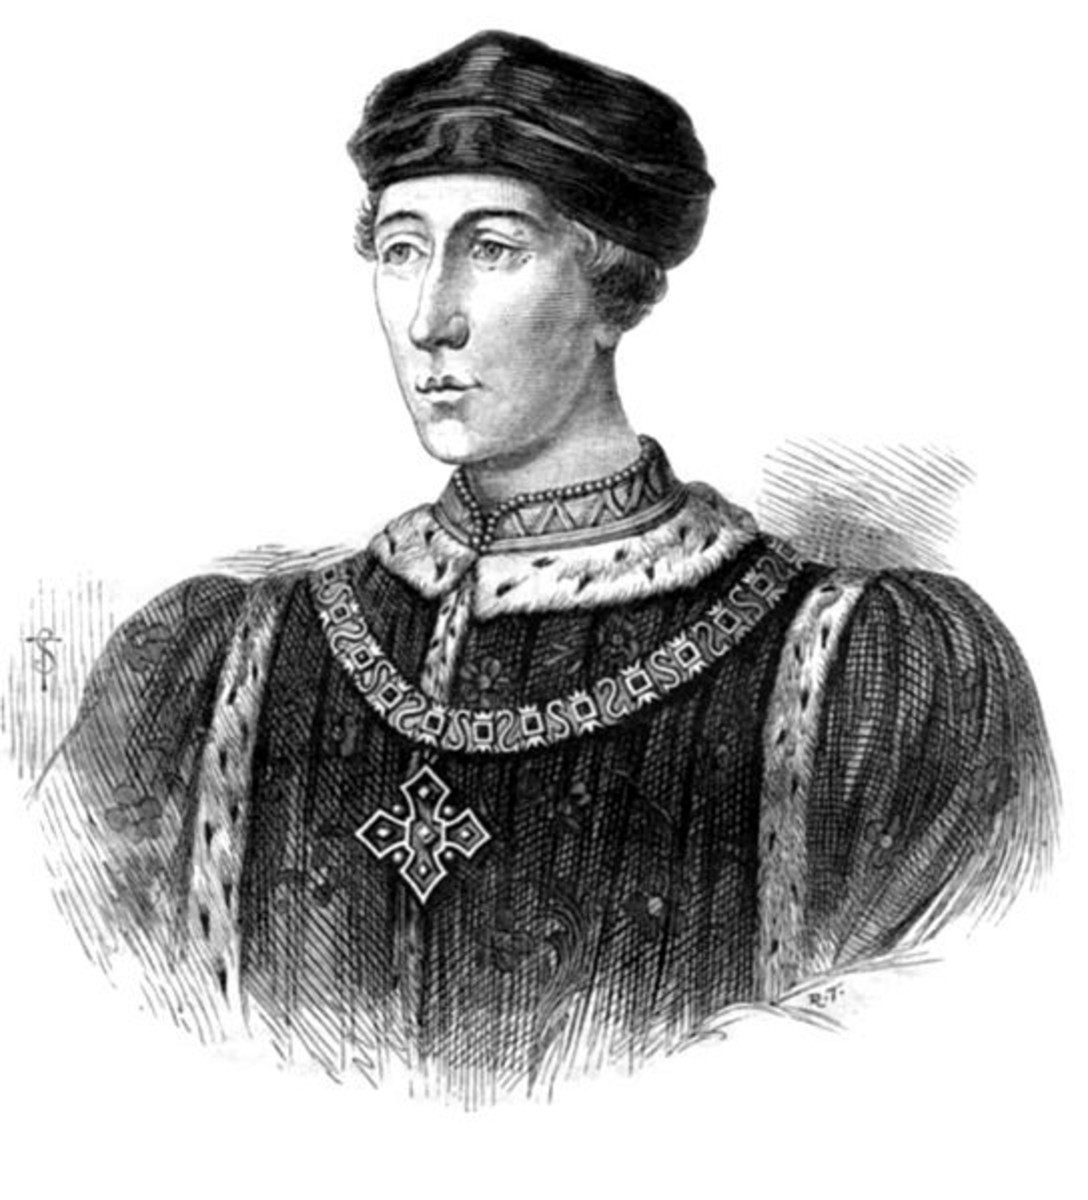 Henry VI, illustration from Cassells History of England, Century Edition published circa 1902 - Public Domain